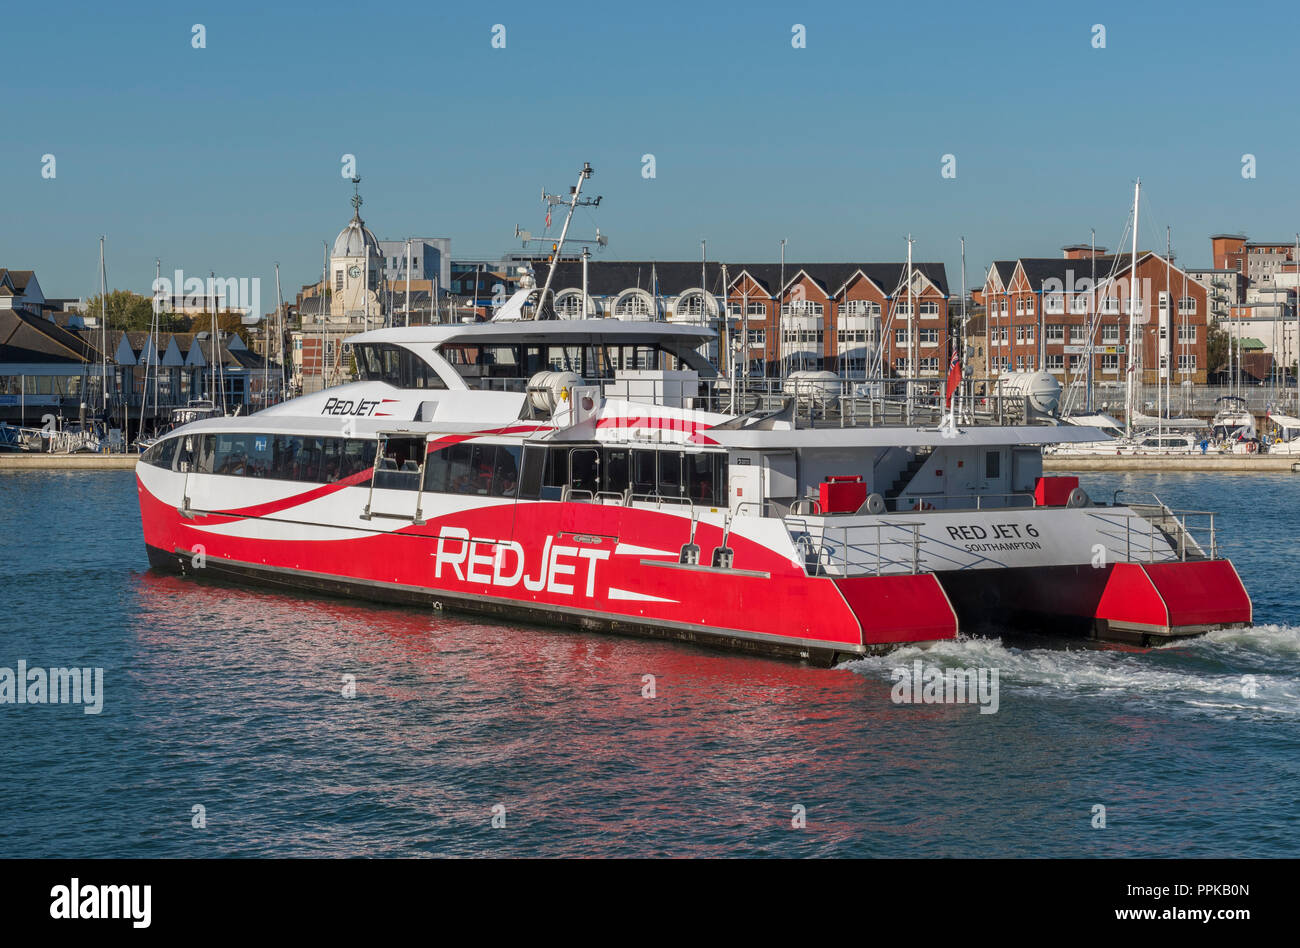 red funnel isle of wight ferries red jet 6 service from Southampton to cowes on the isle of wight. Stock Photo